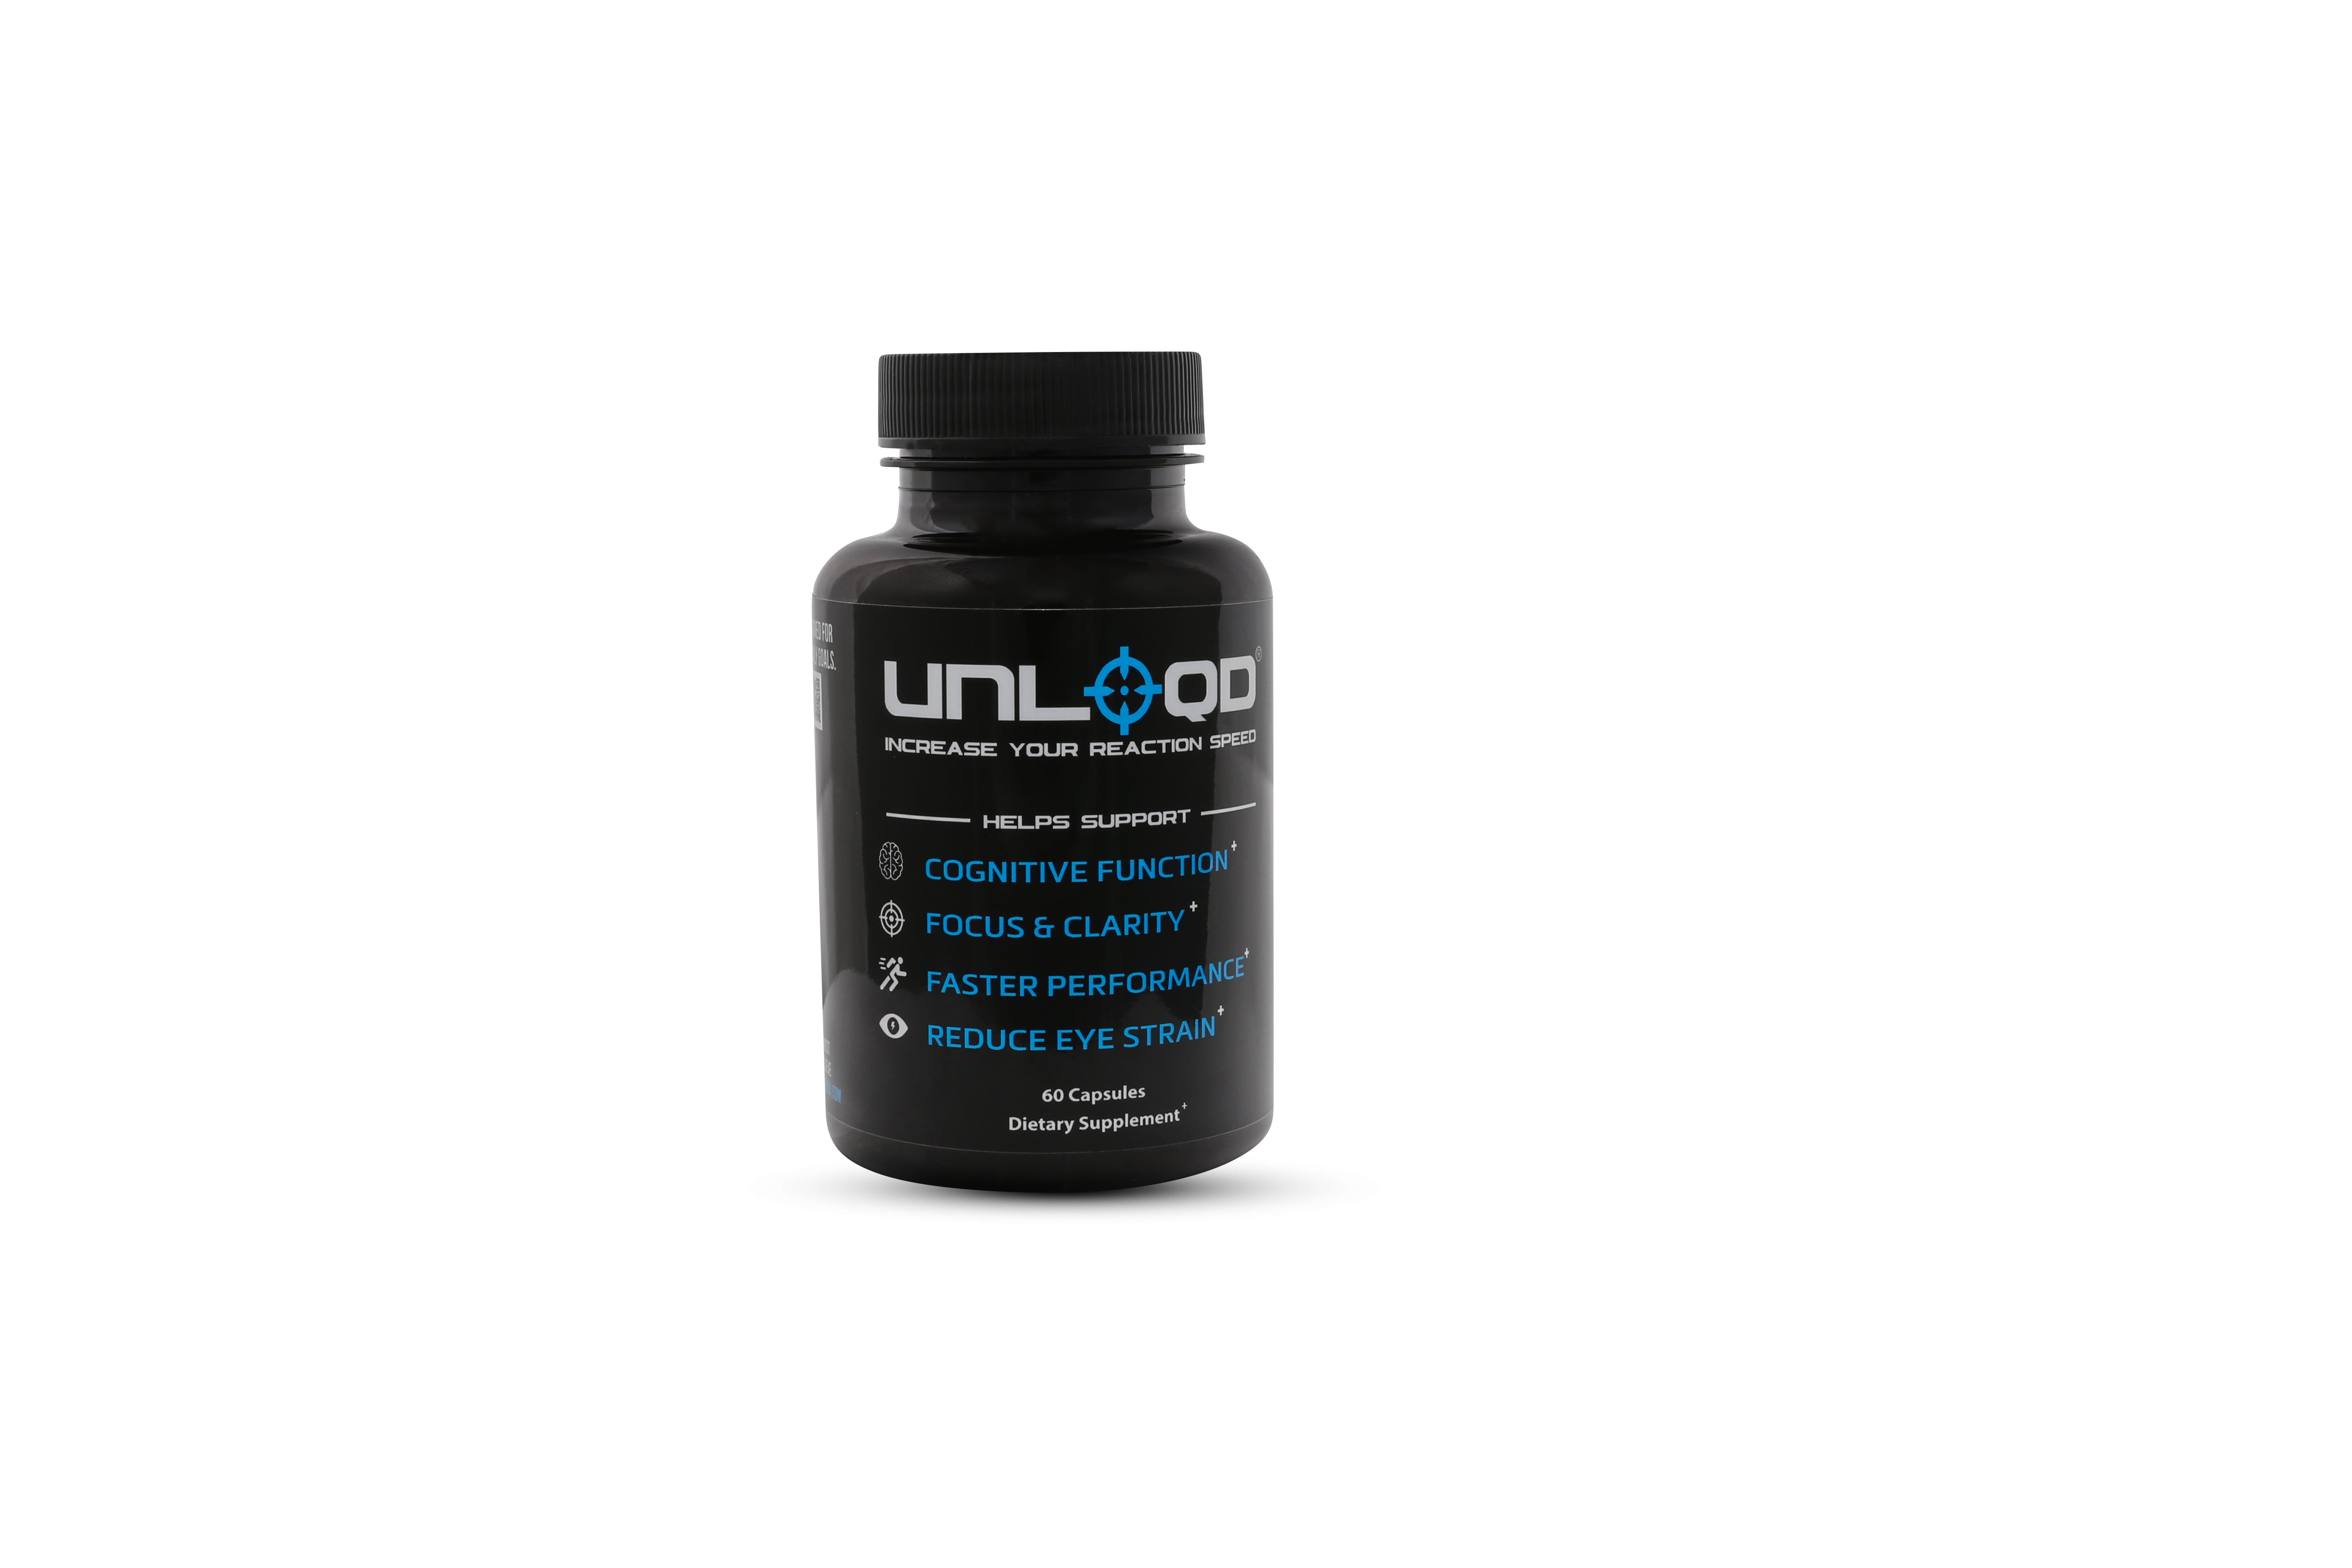 UnloQd Supplement: Protecting Your Eyes and Enhancing Vision for Gamers